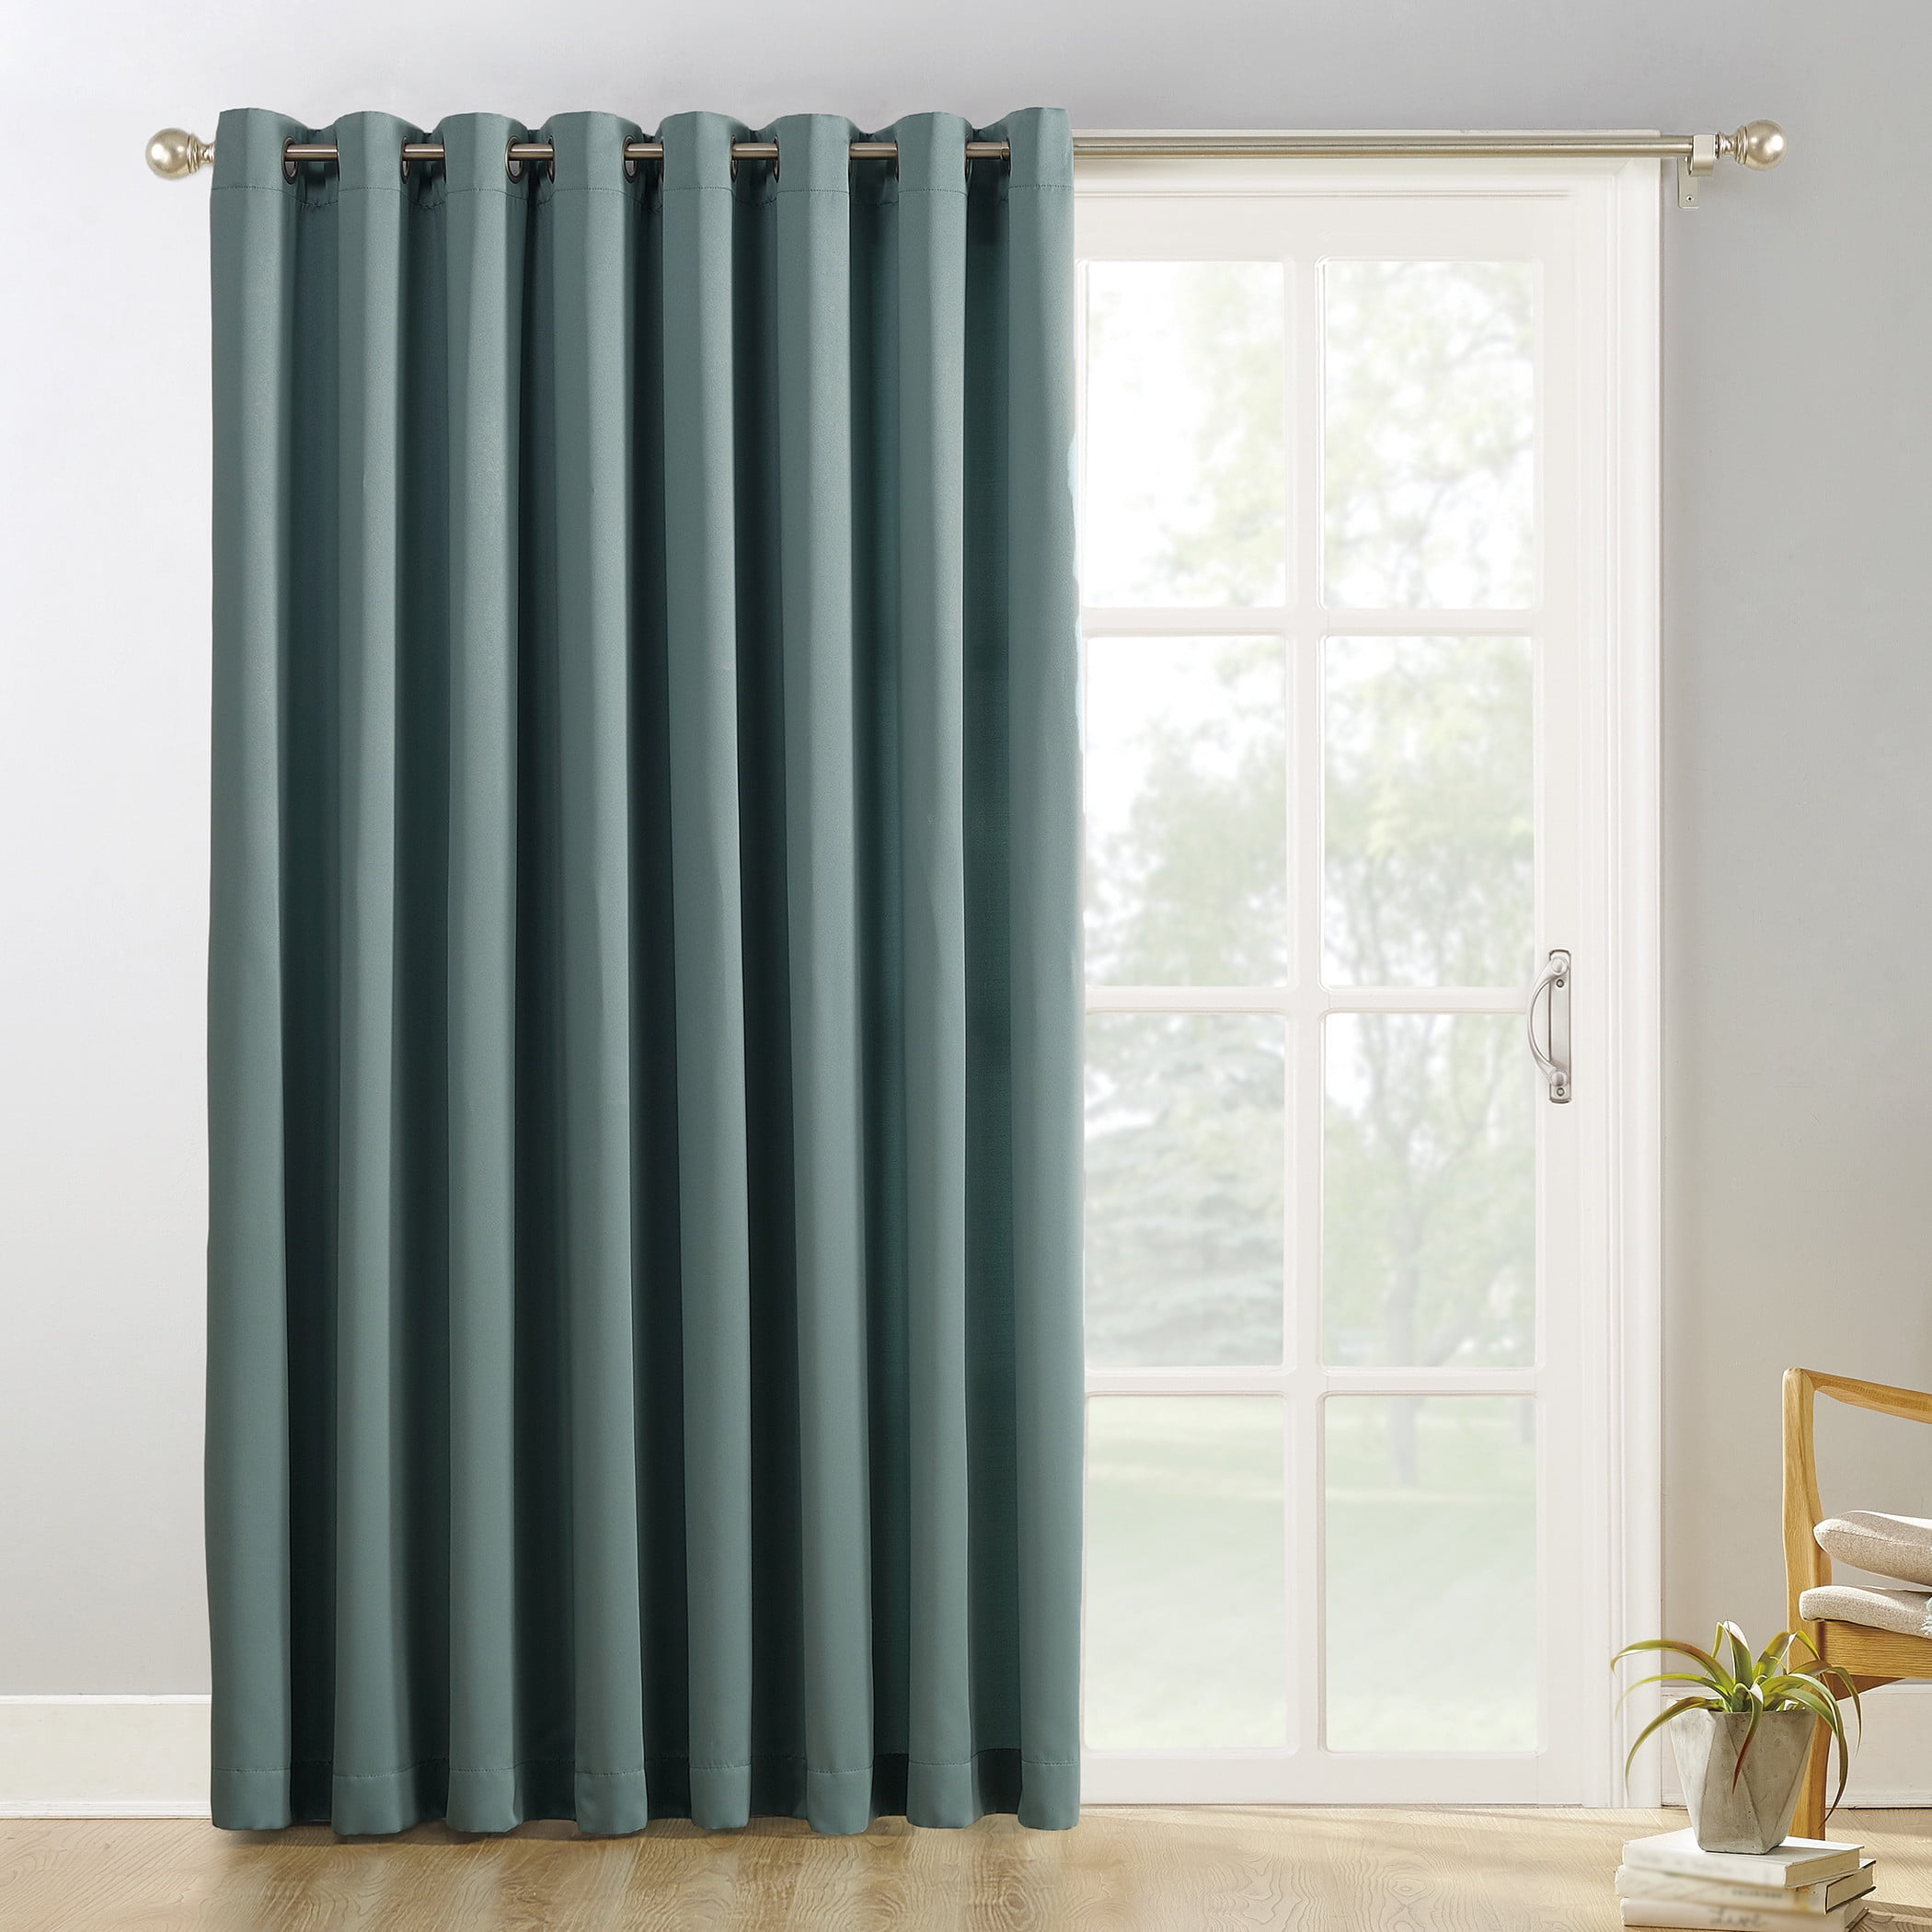 1 Pcs Free shipping World  Wide Polyester Long Door Curtain 